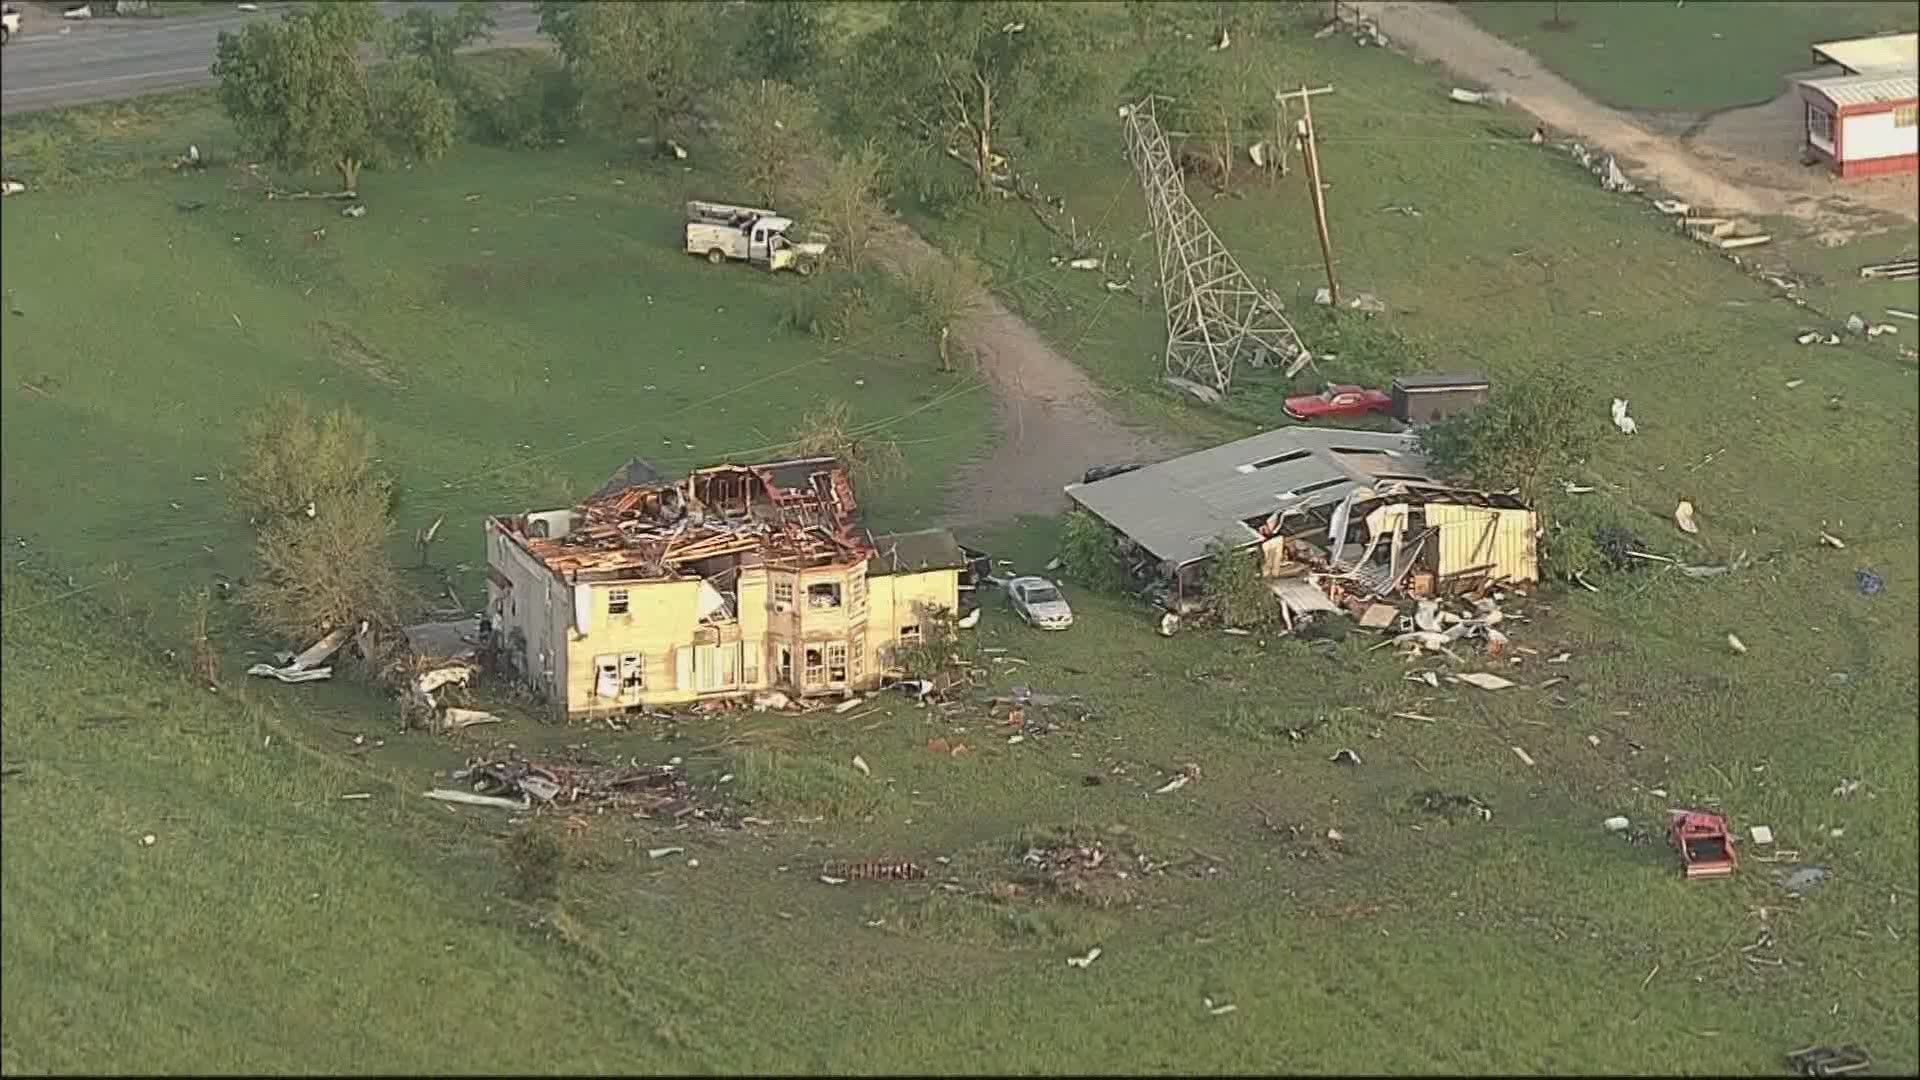 Roofs were ripped off and buildings were destroyed near Forreston and Blum as at least three possible tornadoes were reported to the National Weather Service.